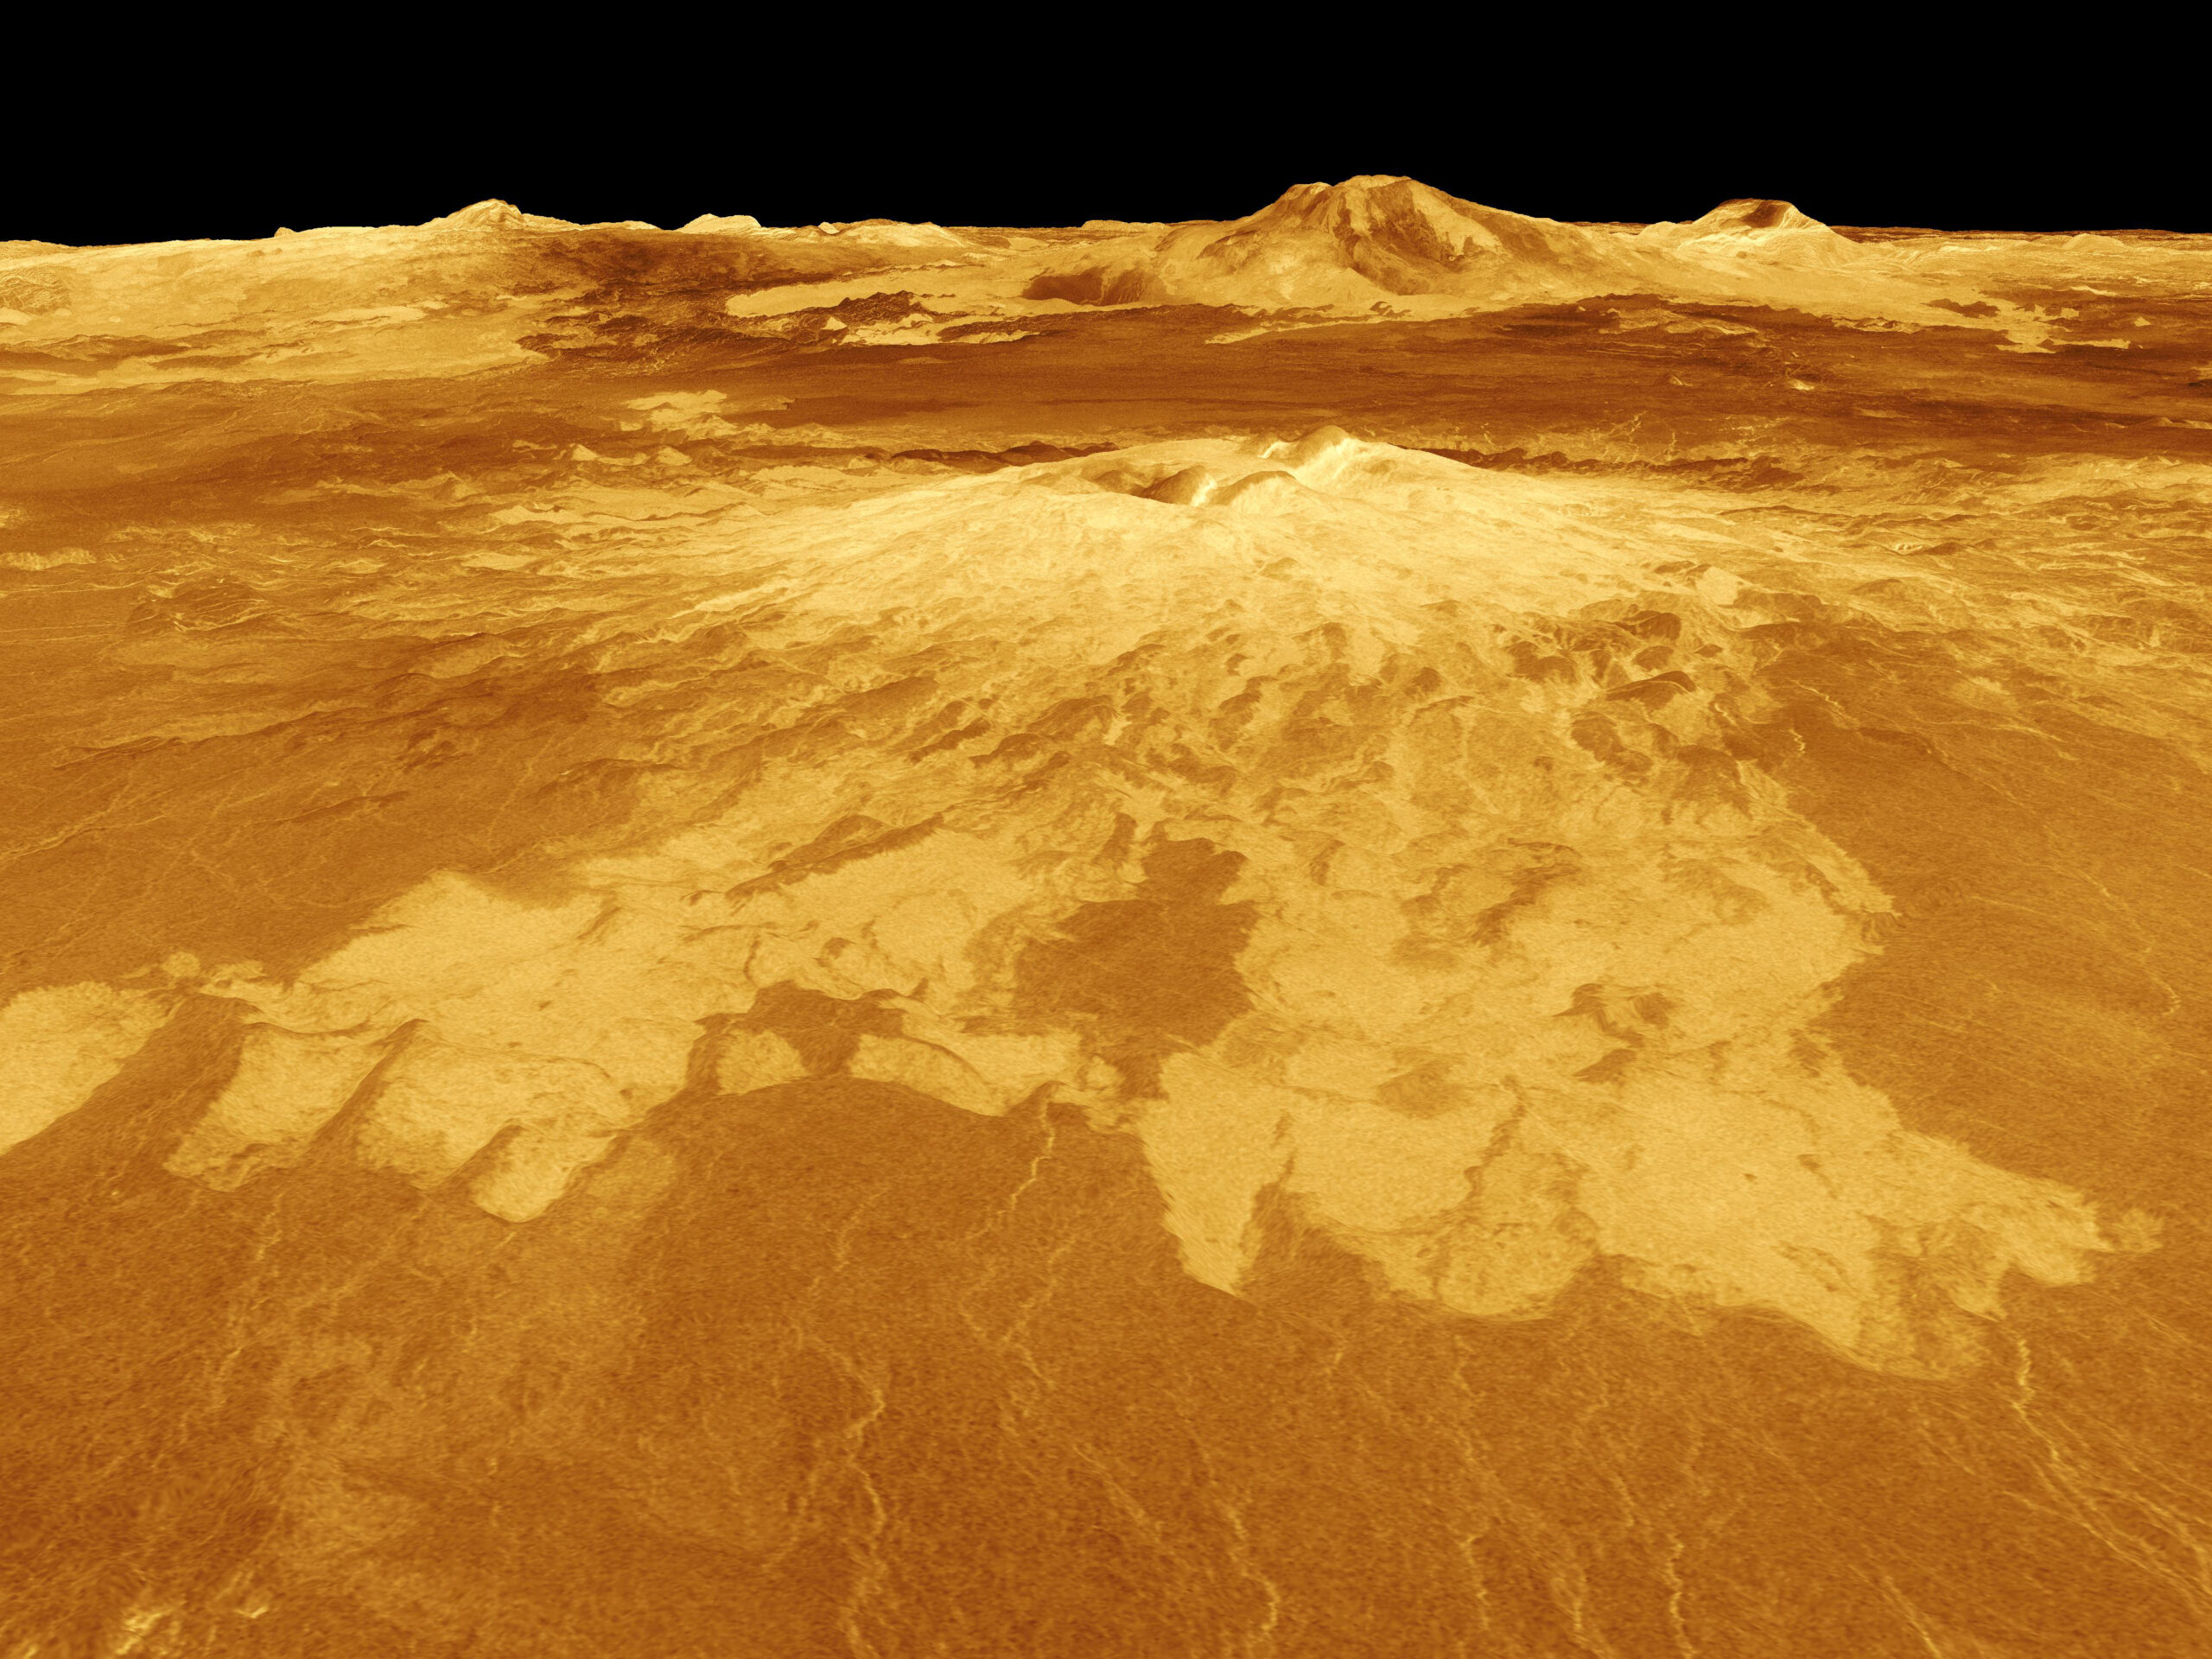 Geologists say Venus has enough active volcanoes to form a ‘Ring of Fire’